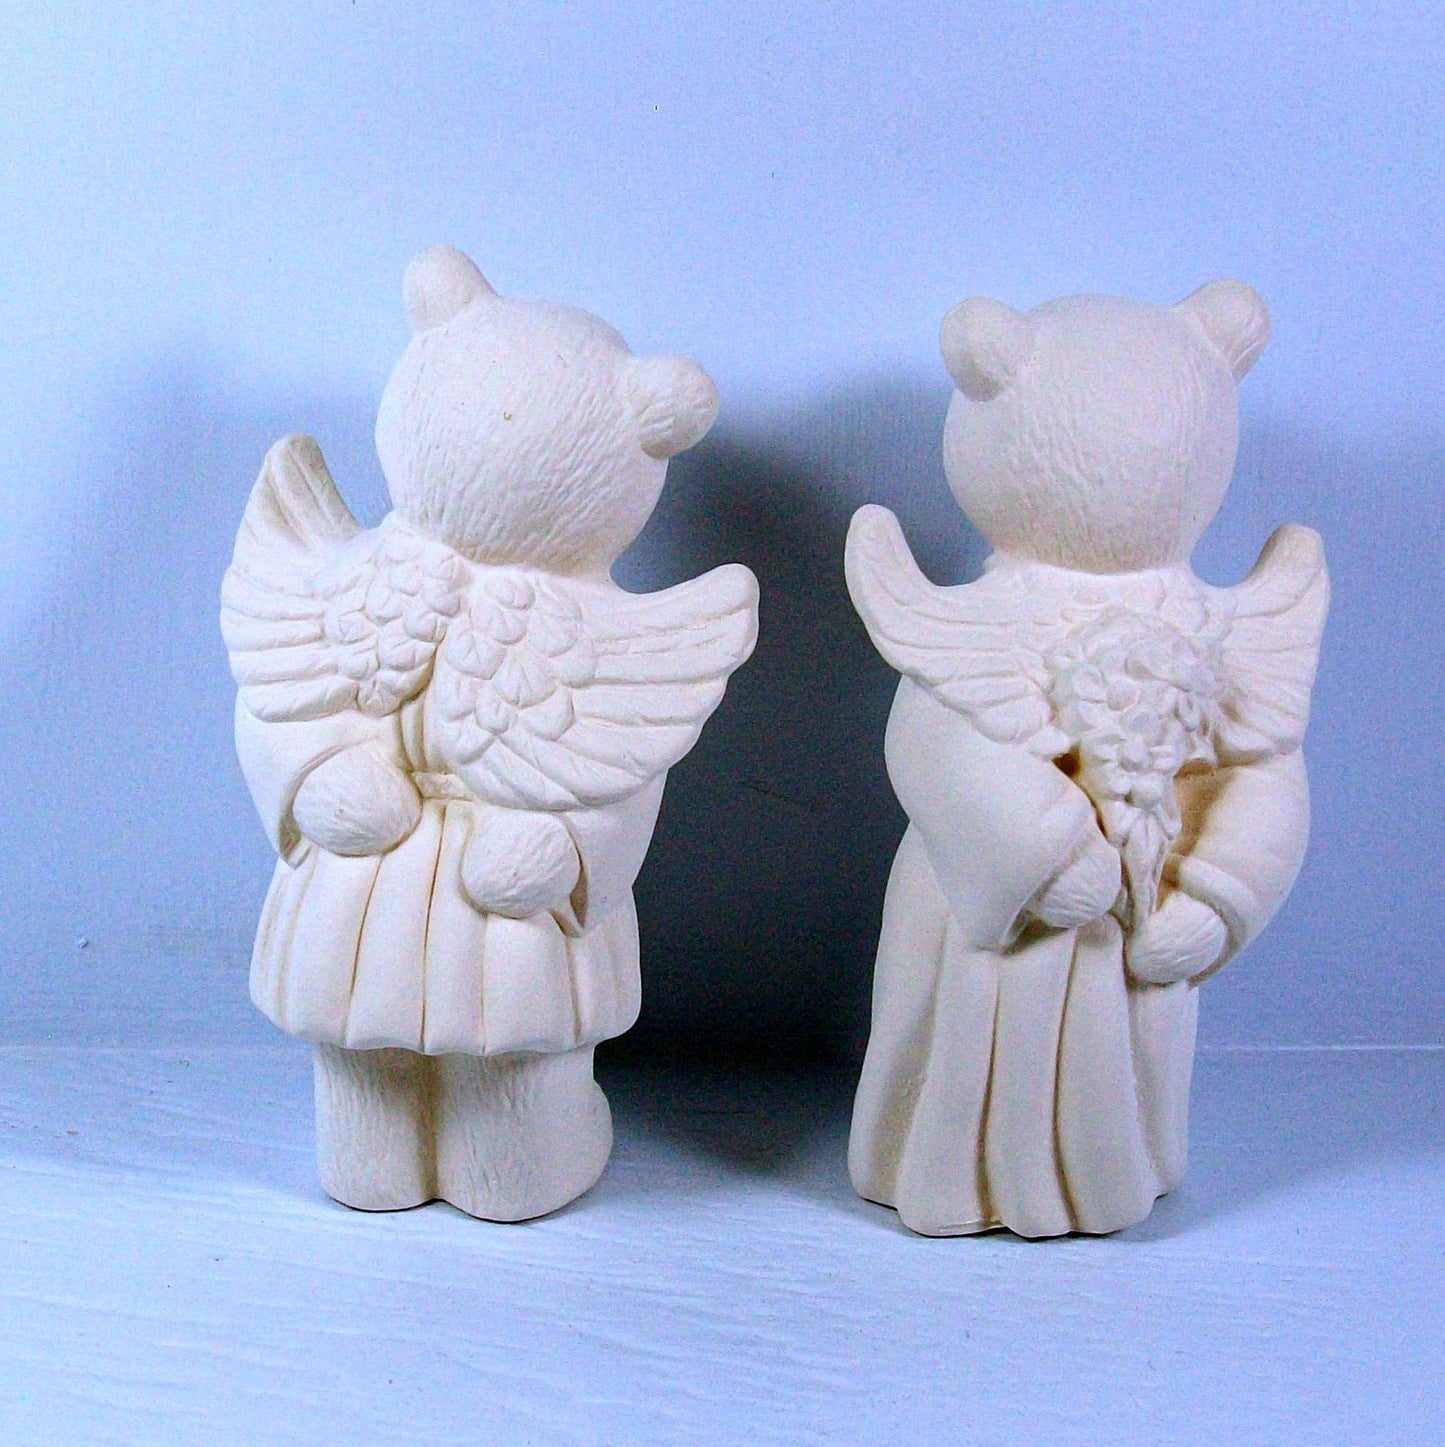 Ready to Paint Ceramic Bisque Bear Angel Figurines, Angel Bear Statues, Bear Lover Gift, Angel Lover Gift, Ceramics To Paint, DYI Ceramics